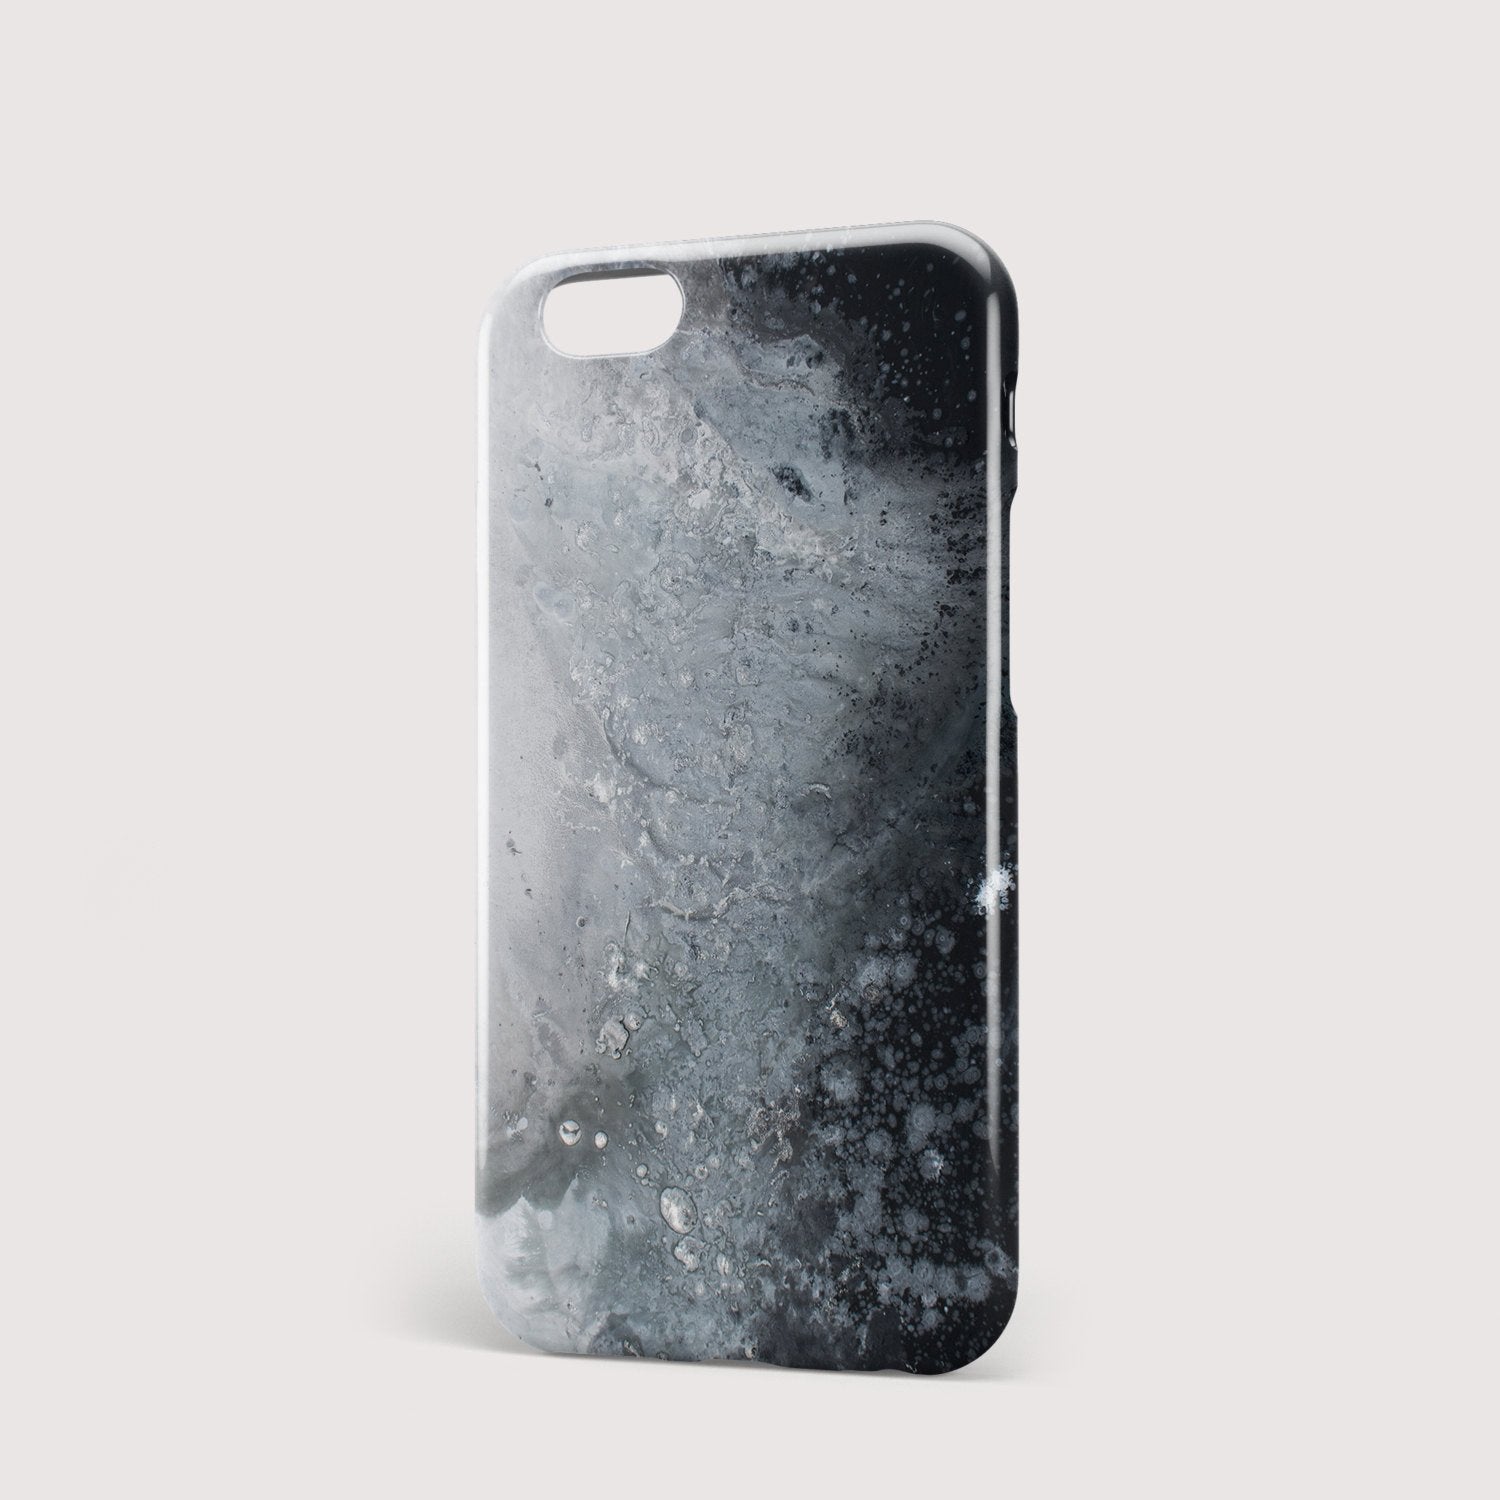 Waves at Dusk iPhone Case